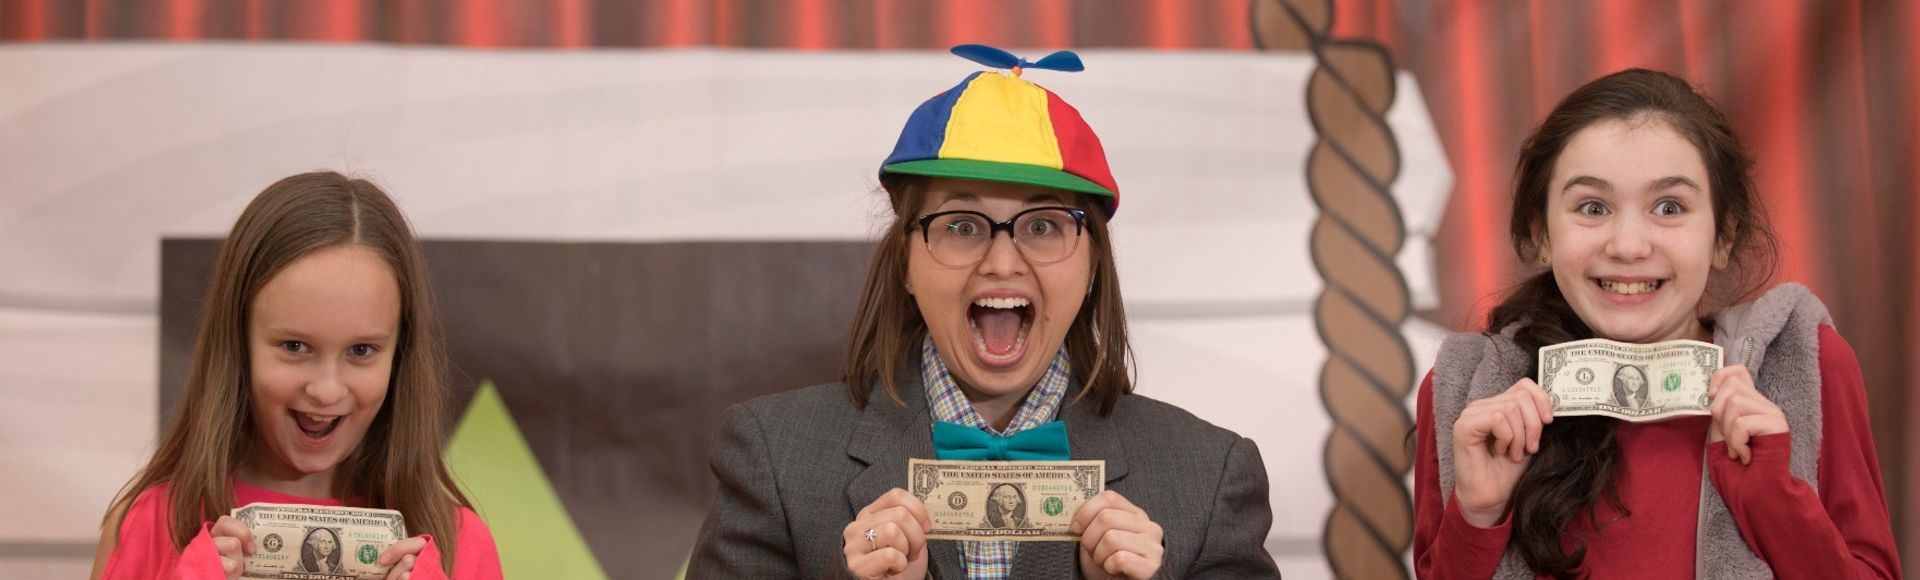 children's theater performer in a funny hat holding up dollar bills with two kids